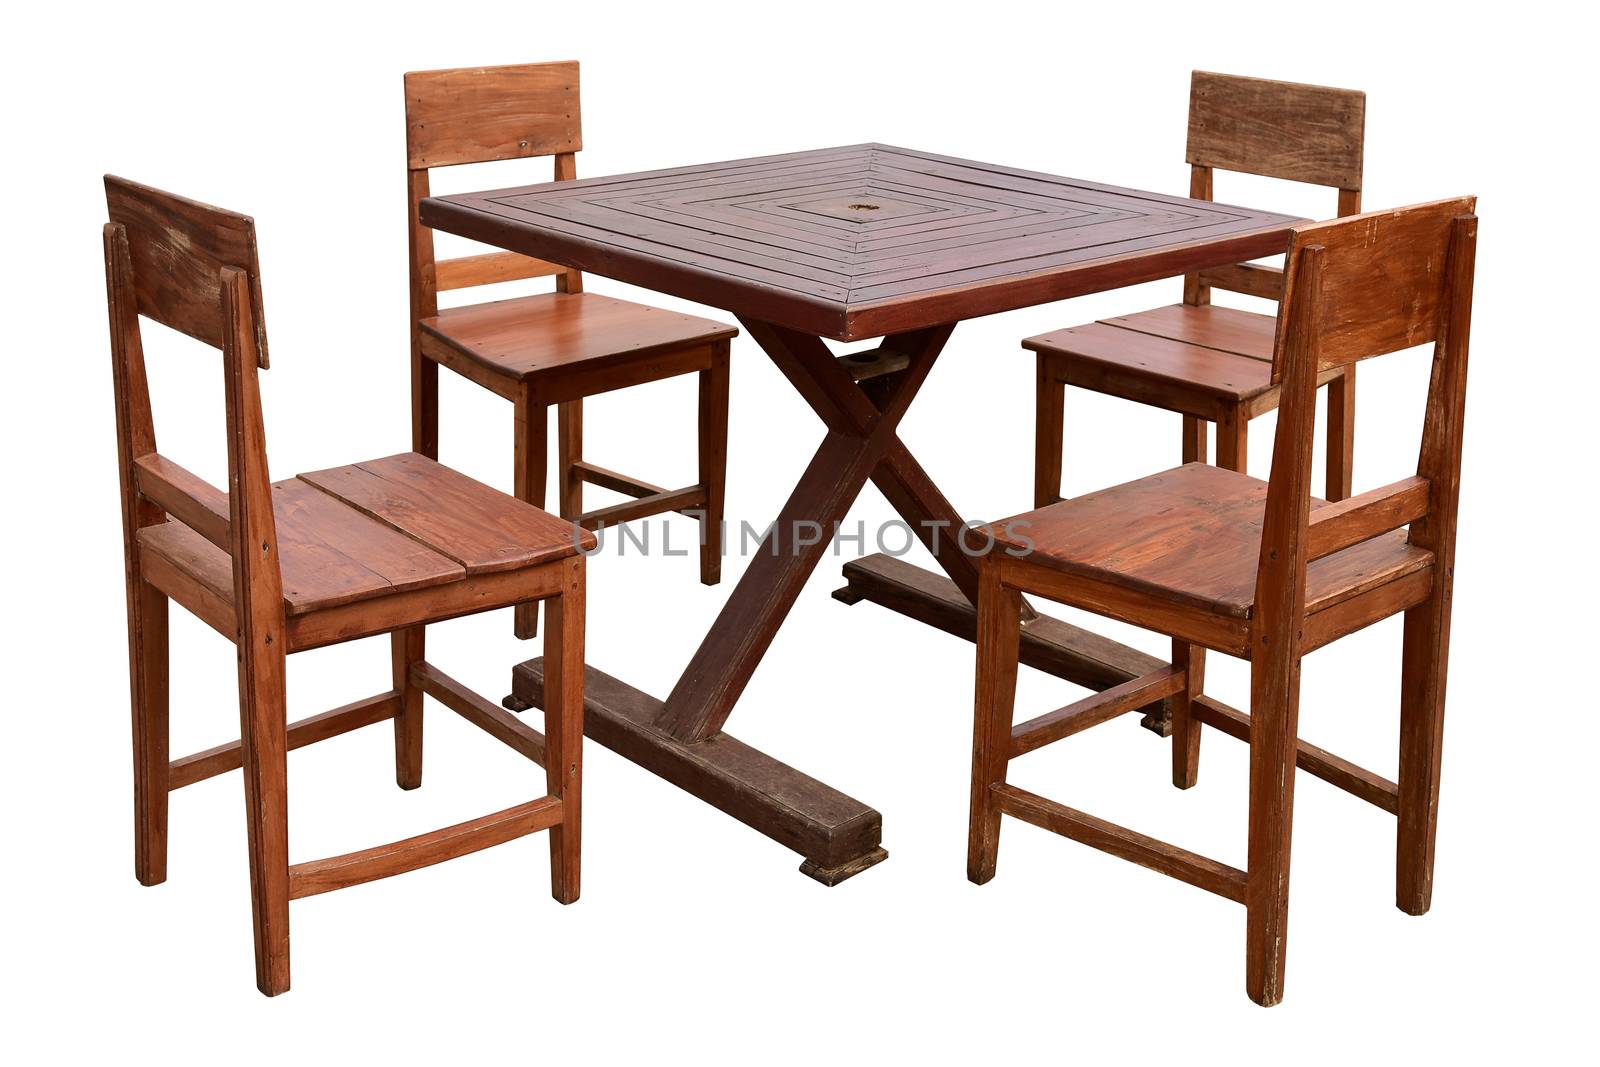 Wooden dining table and chairs isolated on white background, work with clipping path.